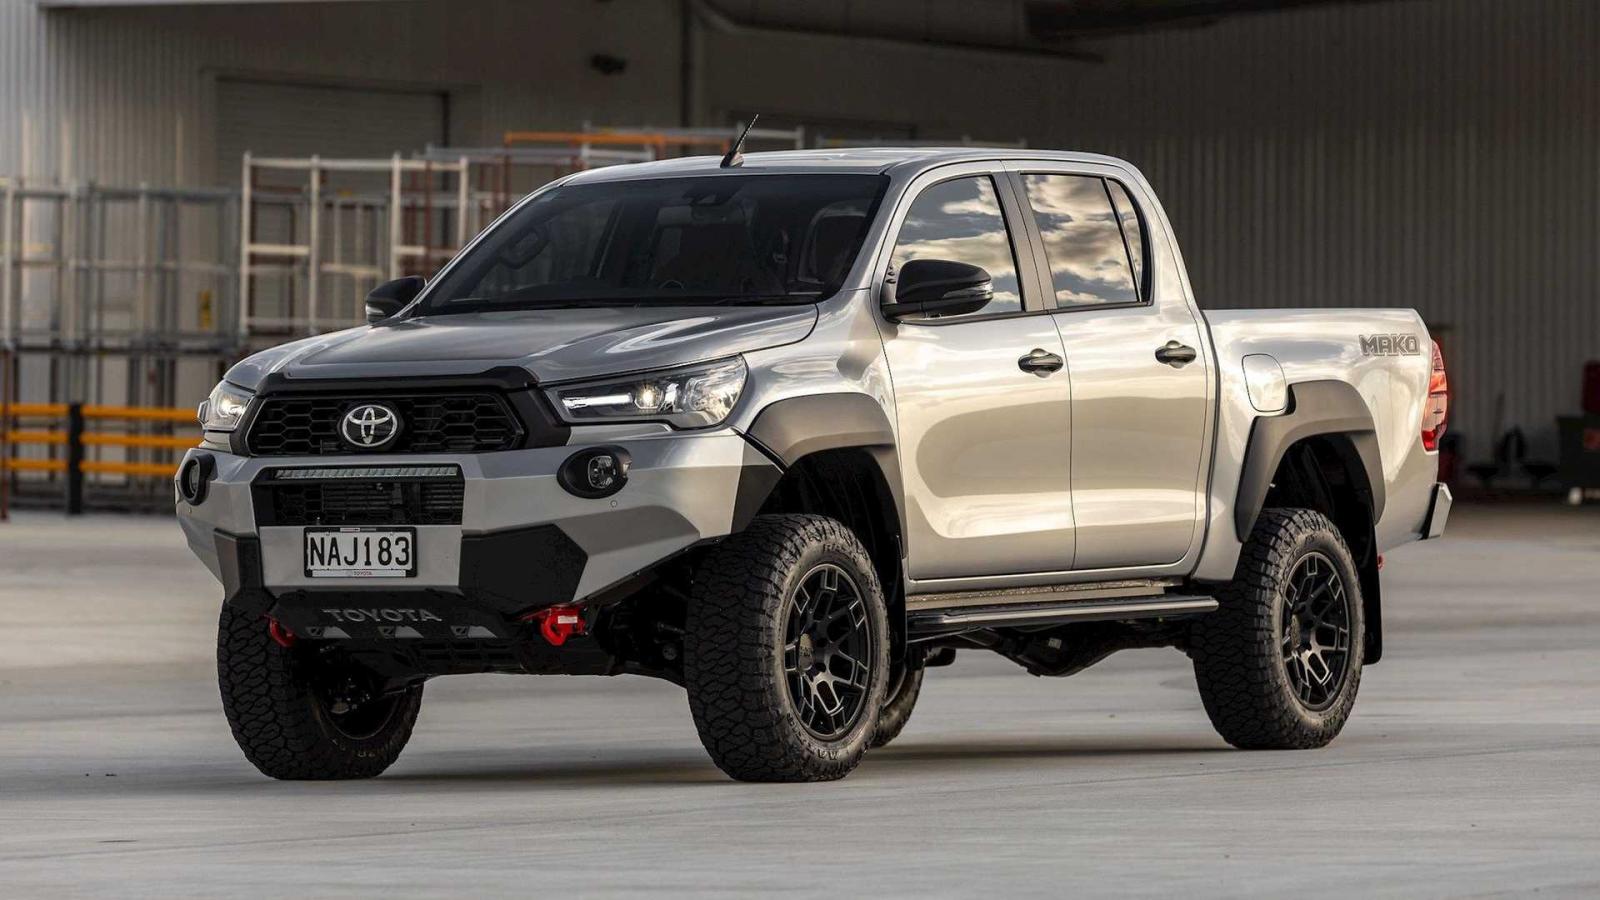 Buy Toyota Hilux for sale in the Philippines